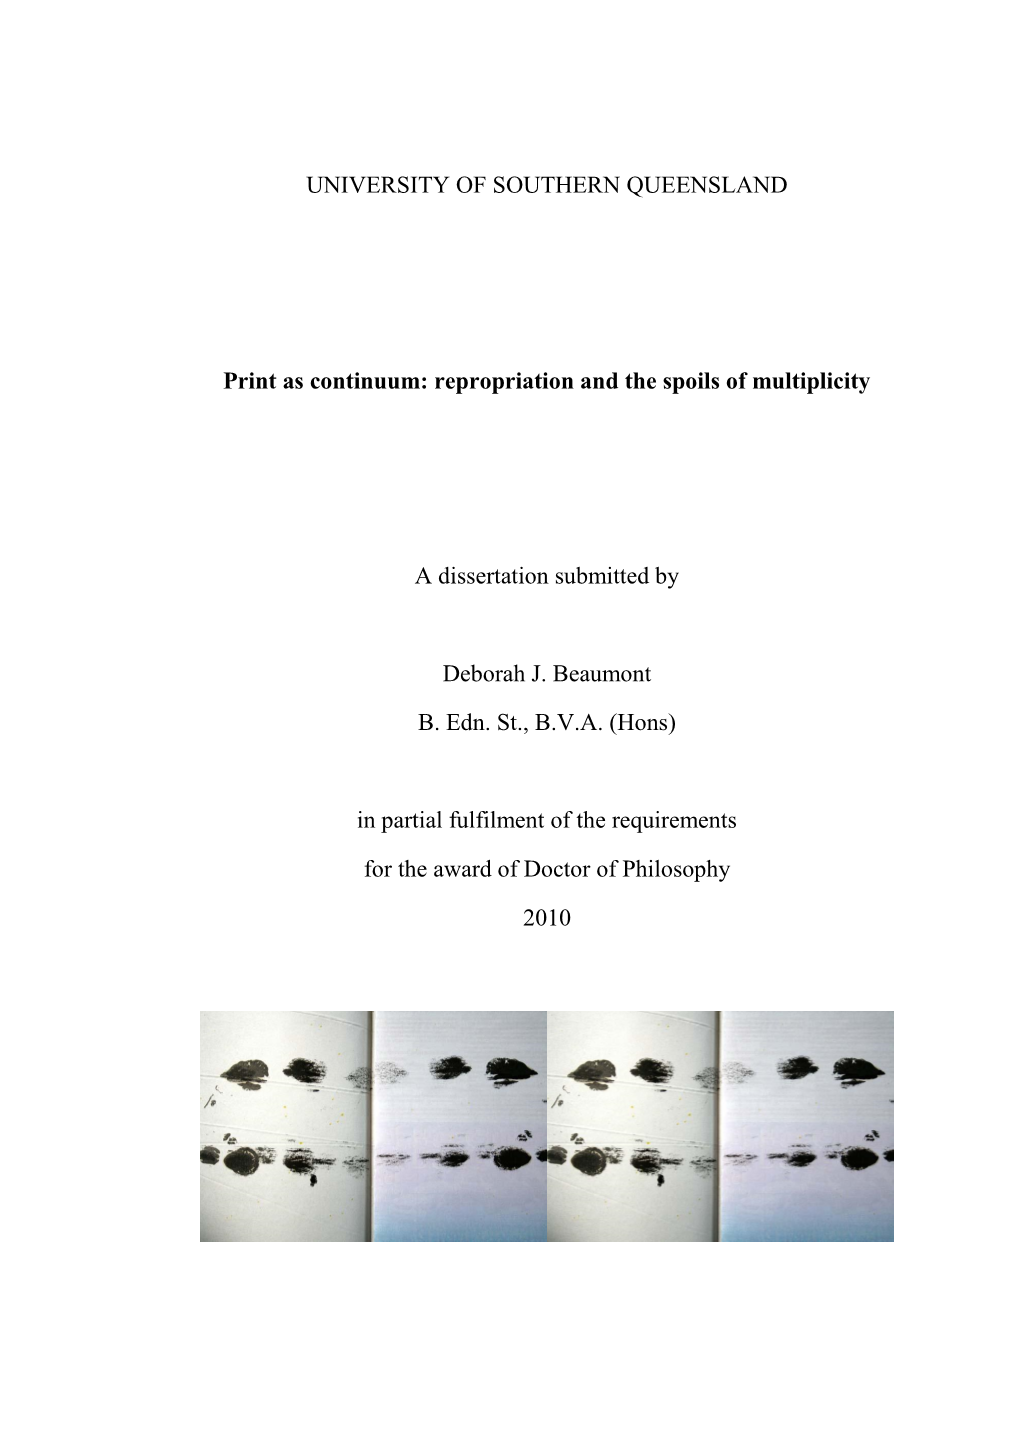 Print As Continuum: Repropriation and the Spoils of Multiplicity